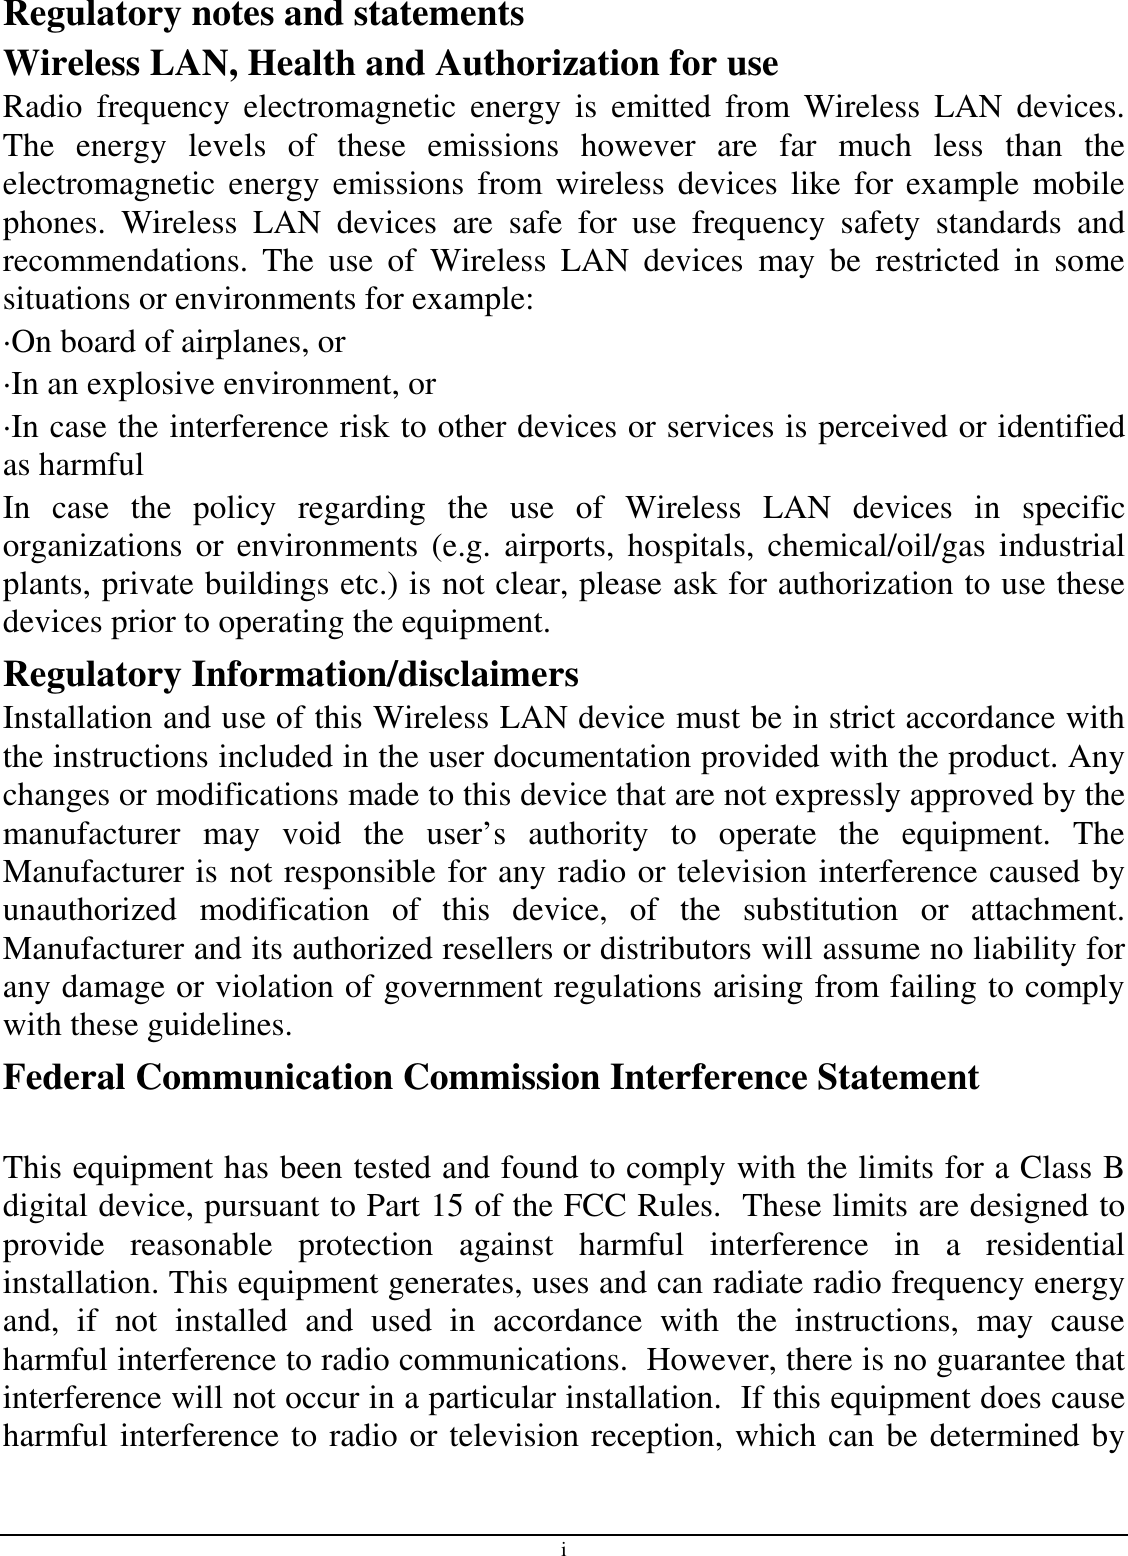 i Regulatory notes and statements Wireless LAN, Health and Authorization for use Radio  frequency  electromagnetic  energy  is  emitted  from  Wireless  LAN  devices. The  energy  levels  of  these  emissions  however  are  far  much  less  than  the electromagnetic  energy  emissions  from wireless devices like for example  mobile phones.  Wireless  LAN  devices  are  safe  for  use  frequency  safety  standards  and recommendations.  The  use  of  Wireless  LAN  devices  may  be  restricted  in  some situations or environments for example: ·On board of airplanes, or ·In an explosive environment, or ·In case the interference risk to other devices or services is perceived or identified as harmful In  case  the  policy  regarding  the  use  of  Wireless  LAN  devices  in  specific organizations  or environments  (e.g.  airports,  hospitals, chemical/oil/gas  industrial plants, private buildings etc.) is not clear, please ask for authorization to use these devices prior to operating the equipment. Regulatory Information/disclaimers Installation and use of this Wireless LAN device must be in strict accordance with the instructions included in the user documentation provided with the product. Any changes or modifications made to this device that are not expressly approved by the manufacturer  may  void  the  user’s  authority  to  operate  the  equipment.  The Manufacturer is not responsible for any radio or television interference caused by unauthorized  modification  of  this  device,  of  the  substitution  or  attachment. Manufacturer and its authorized resellers or distributors will assume no liability for any damage or violation of government regulations arising from failing to comply with these guidelines. Federal Communication Commission Interference Statement  This equipment has been tested and found to comply with the limits for a Class B digital device, pursuant to Part 15 of the FCC Rules.  These limits are designed to provide  reasonable  protection  against  harmful  interference  in  a  residential installation. This equipment generates, uses and can radiate radio frequency energy and,  if  not  installed  and  used  in  accordance  with  the  instructions,  may  cause harmful interference to radio communications.  However, there is no guarantee that interference will not occur in a particular installation.  If this equipment does cause harmful interference to radio or television reception, which can be determined by 